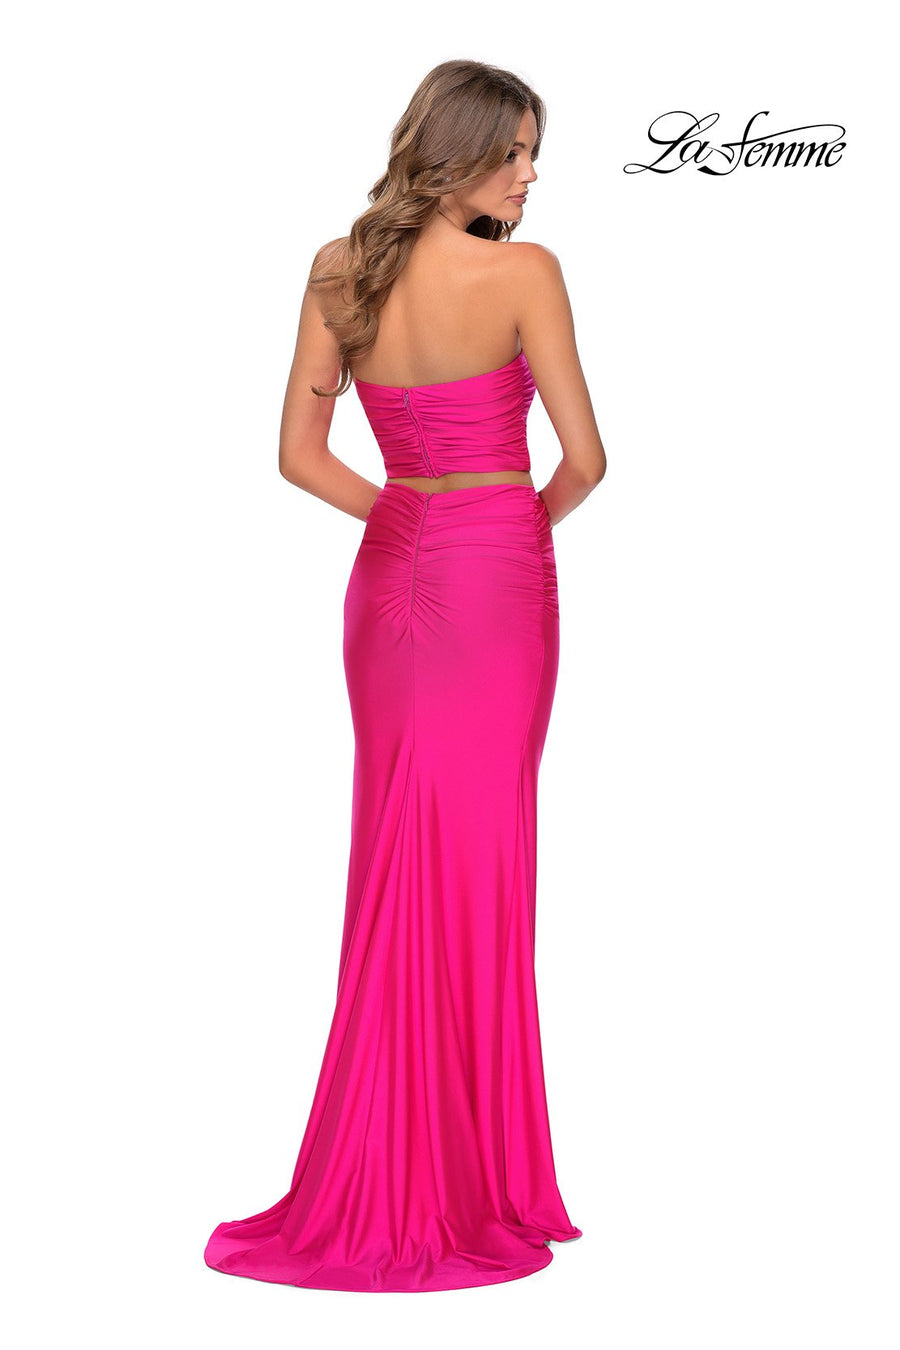 La Femme 28972 prom dress images.  La Femme 28972 is available in these colors: Neon Green, Neon Pink, Neon Yellow.